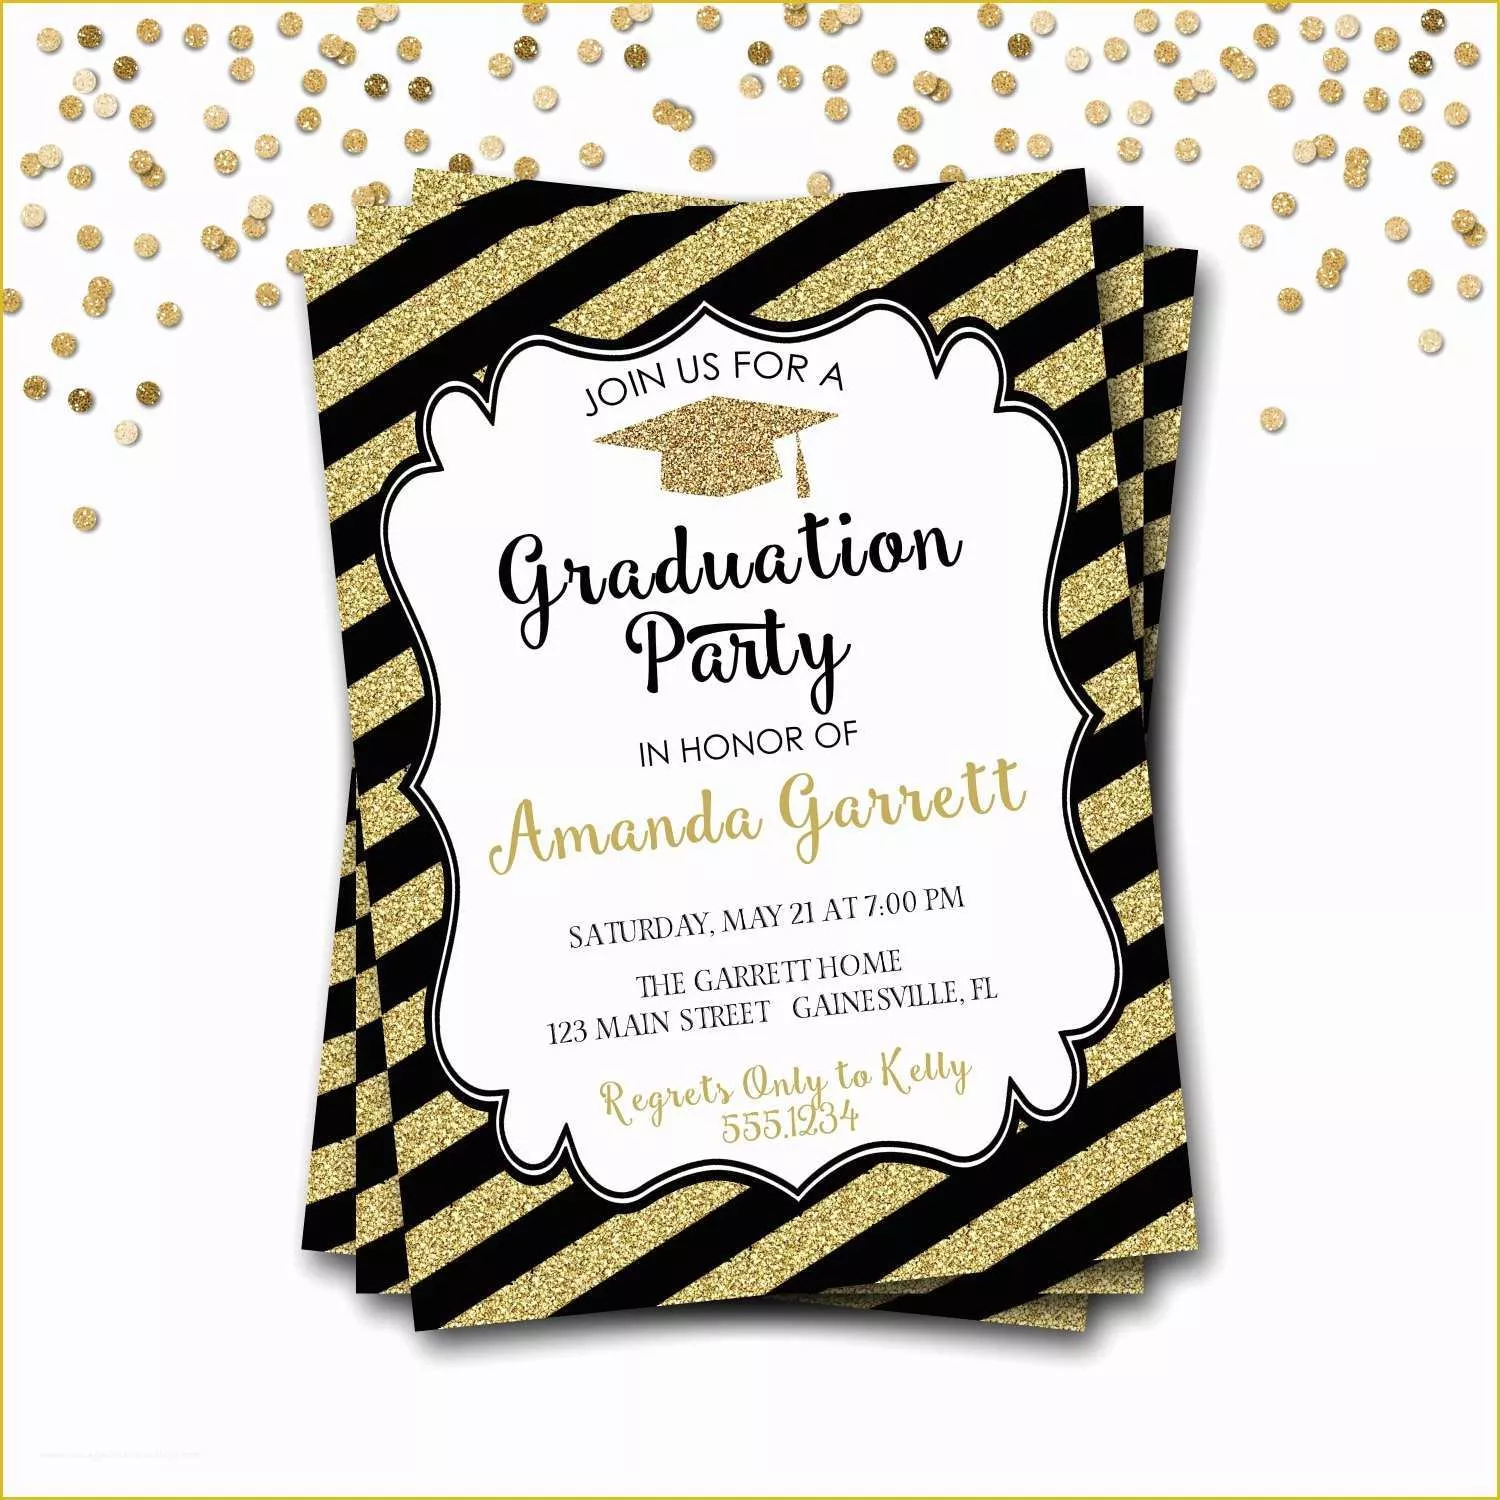 Graduation Invitation Templates Free Download Of Black and Gold Graduation Invitations which Free to Downl